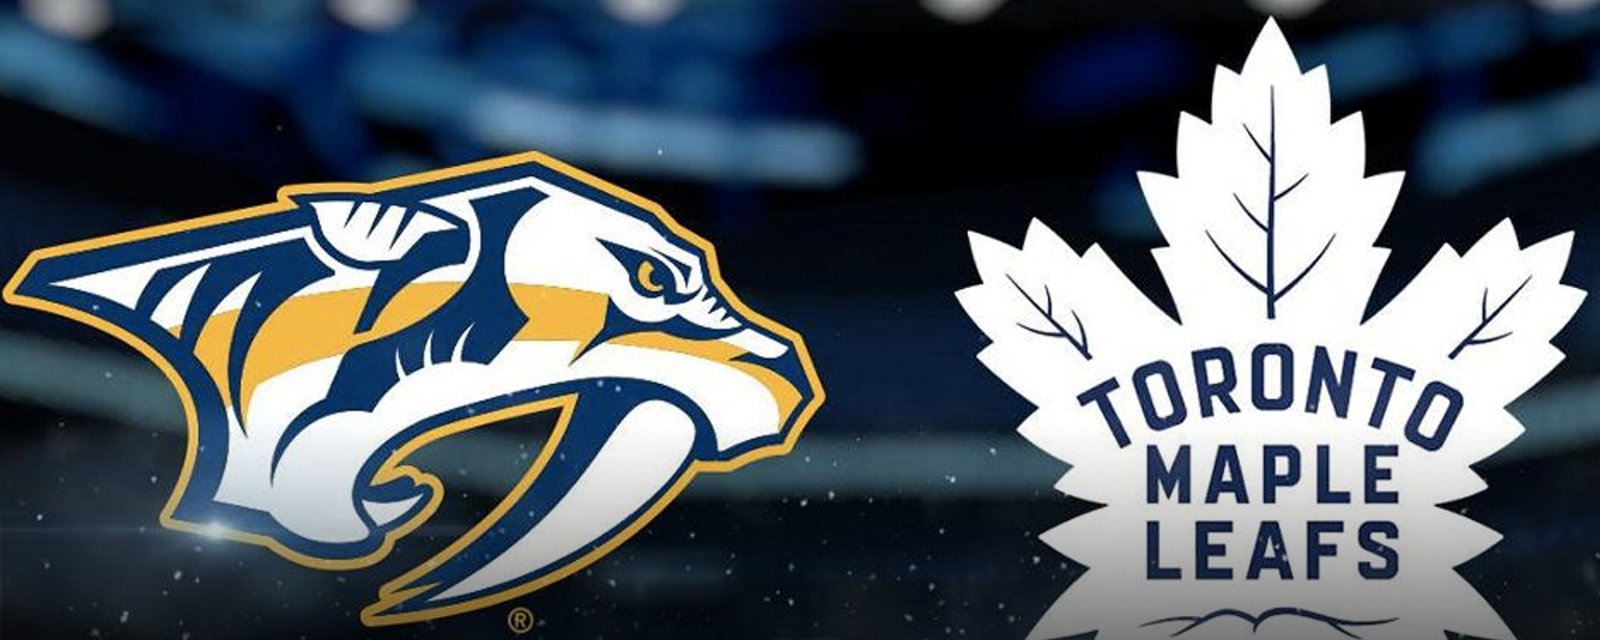 Rumor: Leafs and Preds to make monster deal?